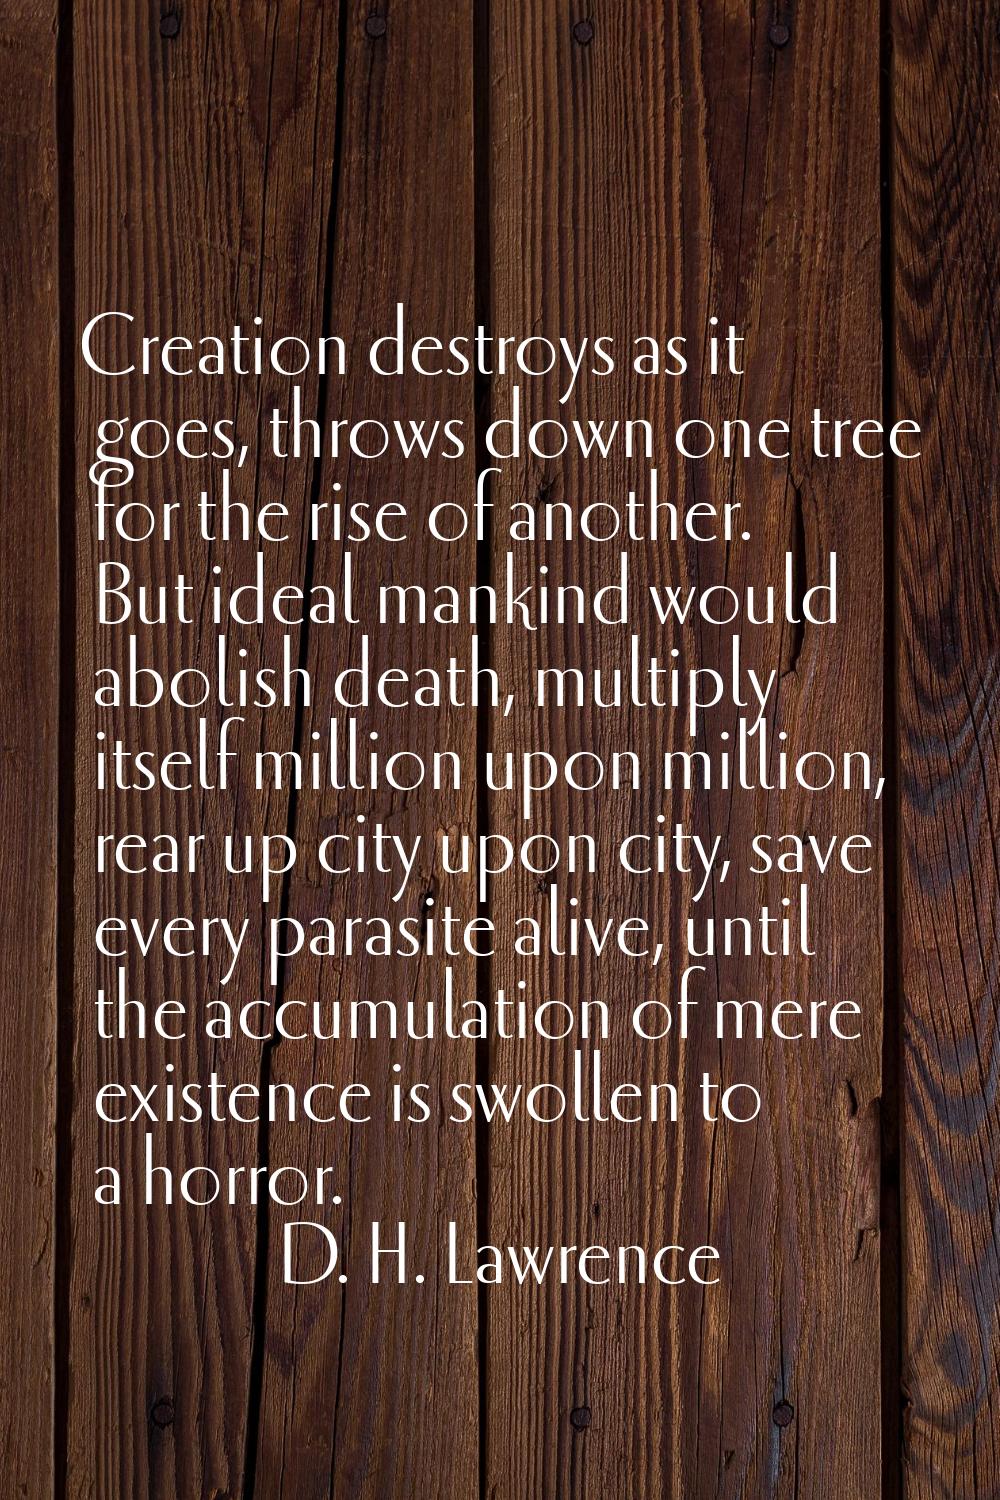 Creation destroys as it goes, throws down one tree for the rise of another. But ideal mankind would